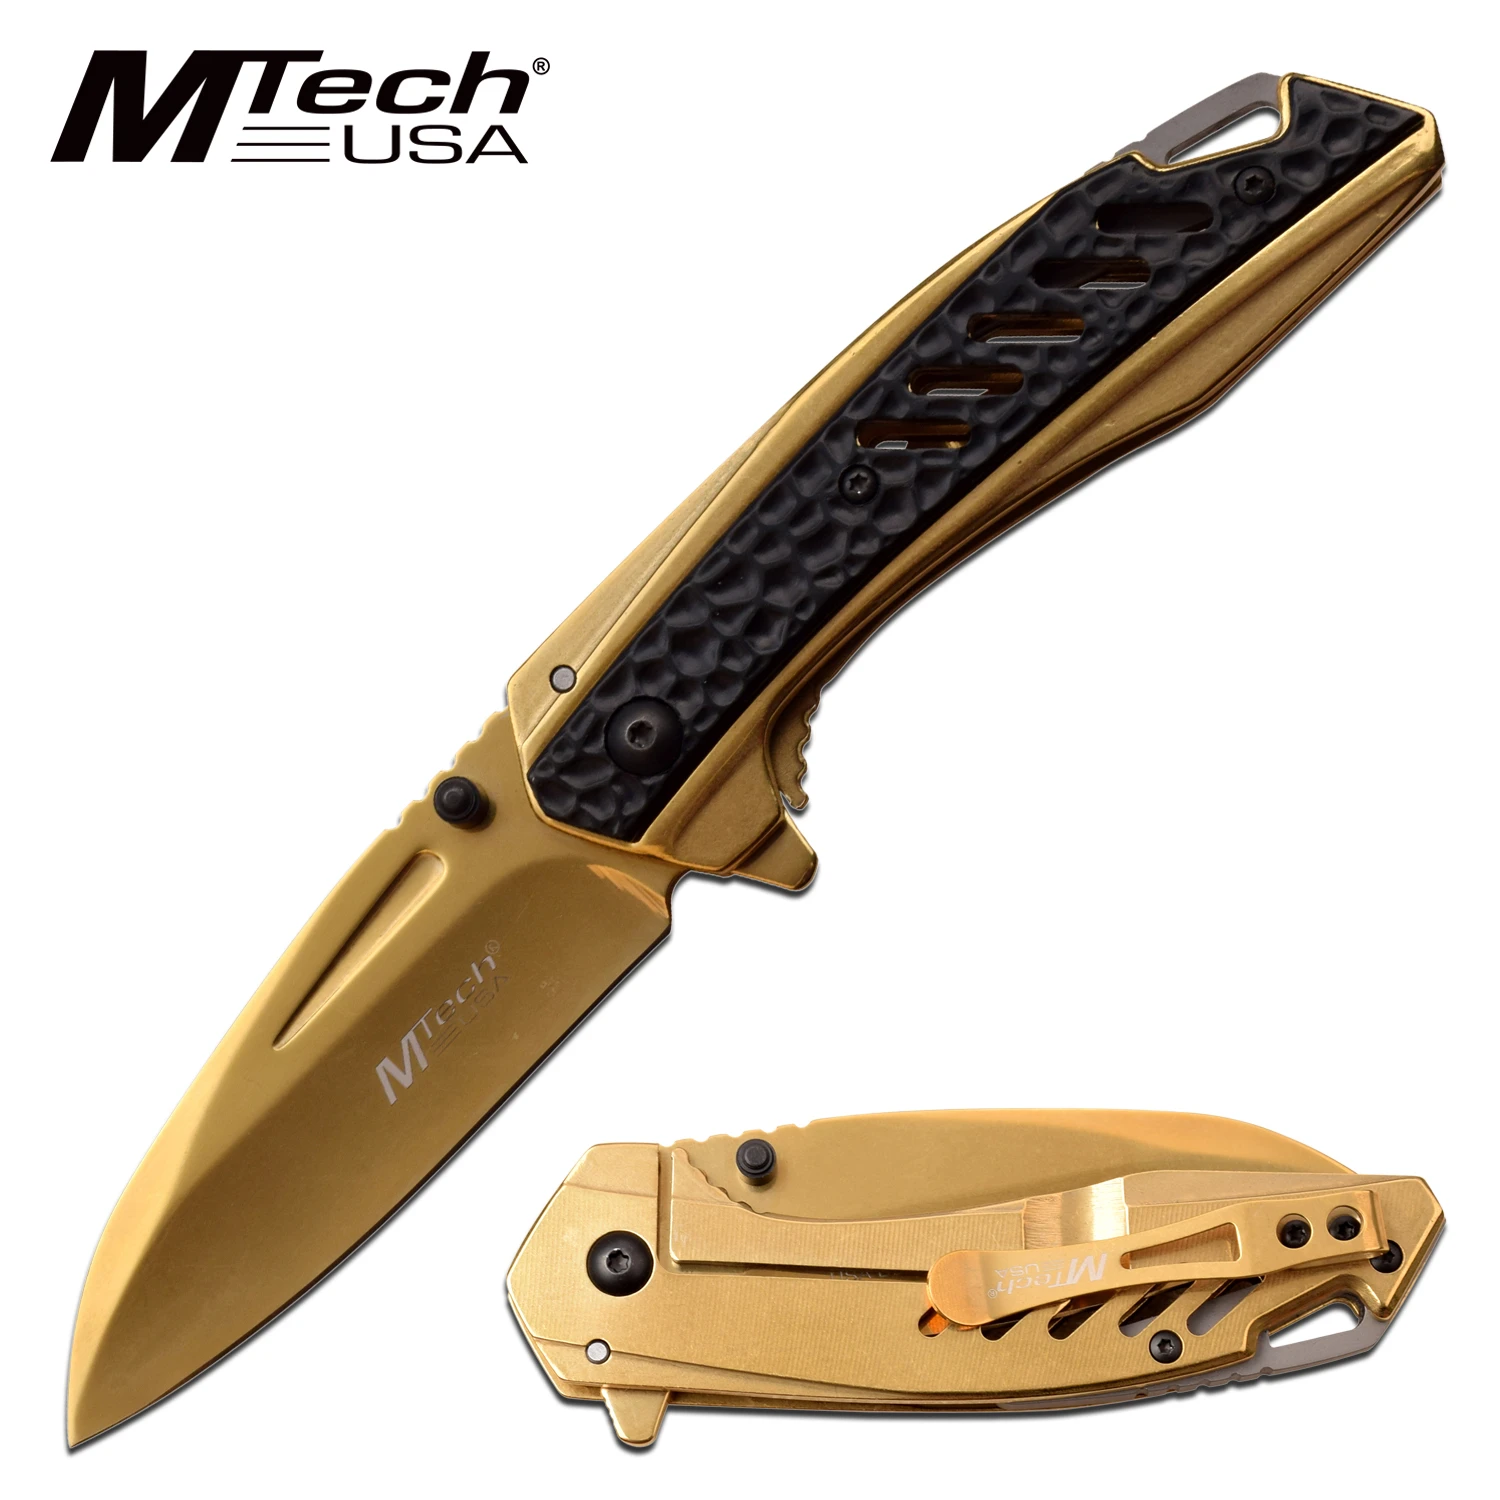 Spring-Assist Folding Knife Mtech Tactical Gold Wharncliffe Mirror Blade Black